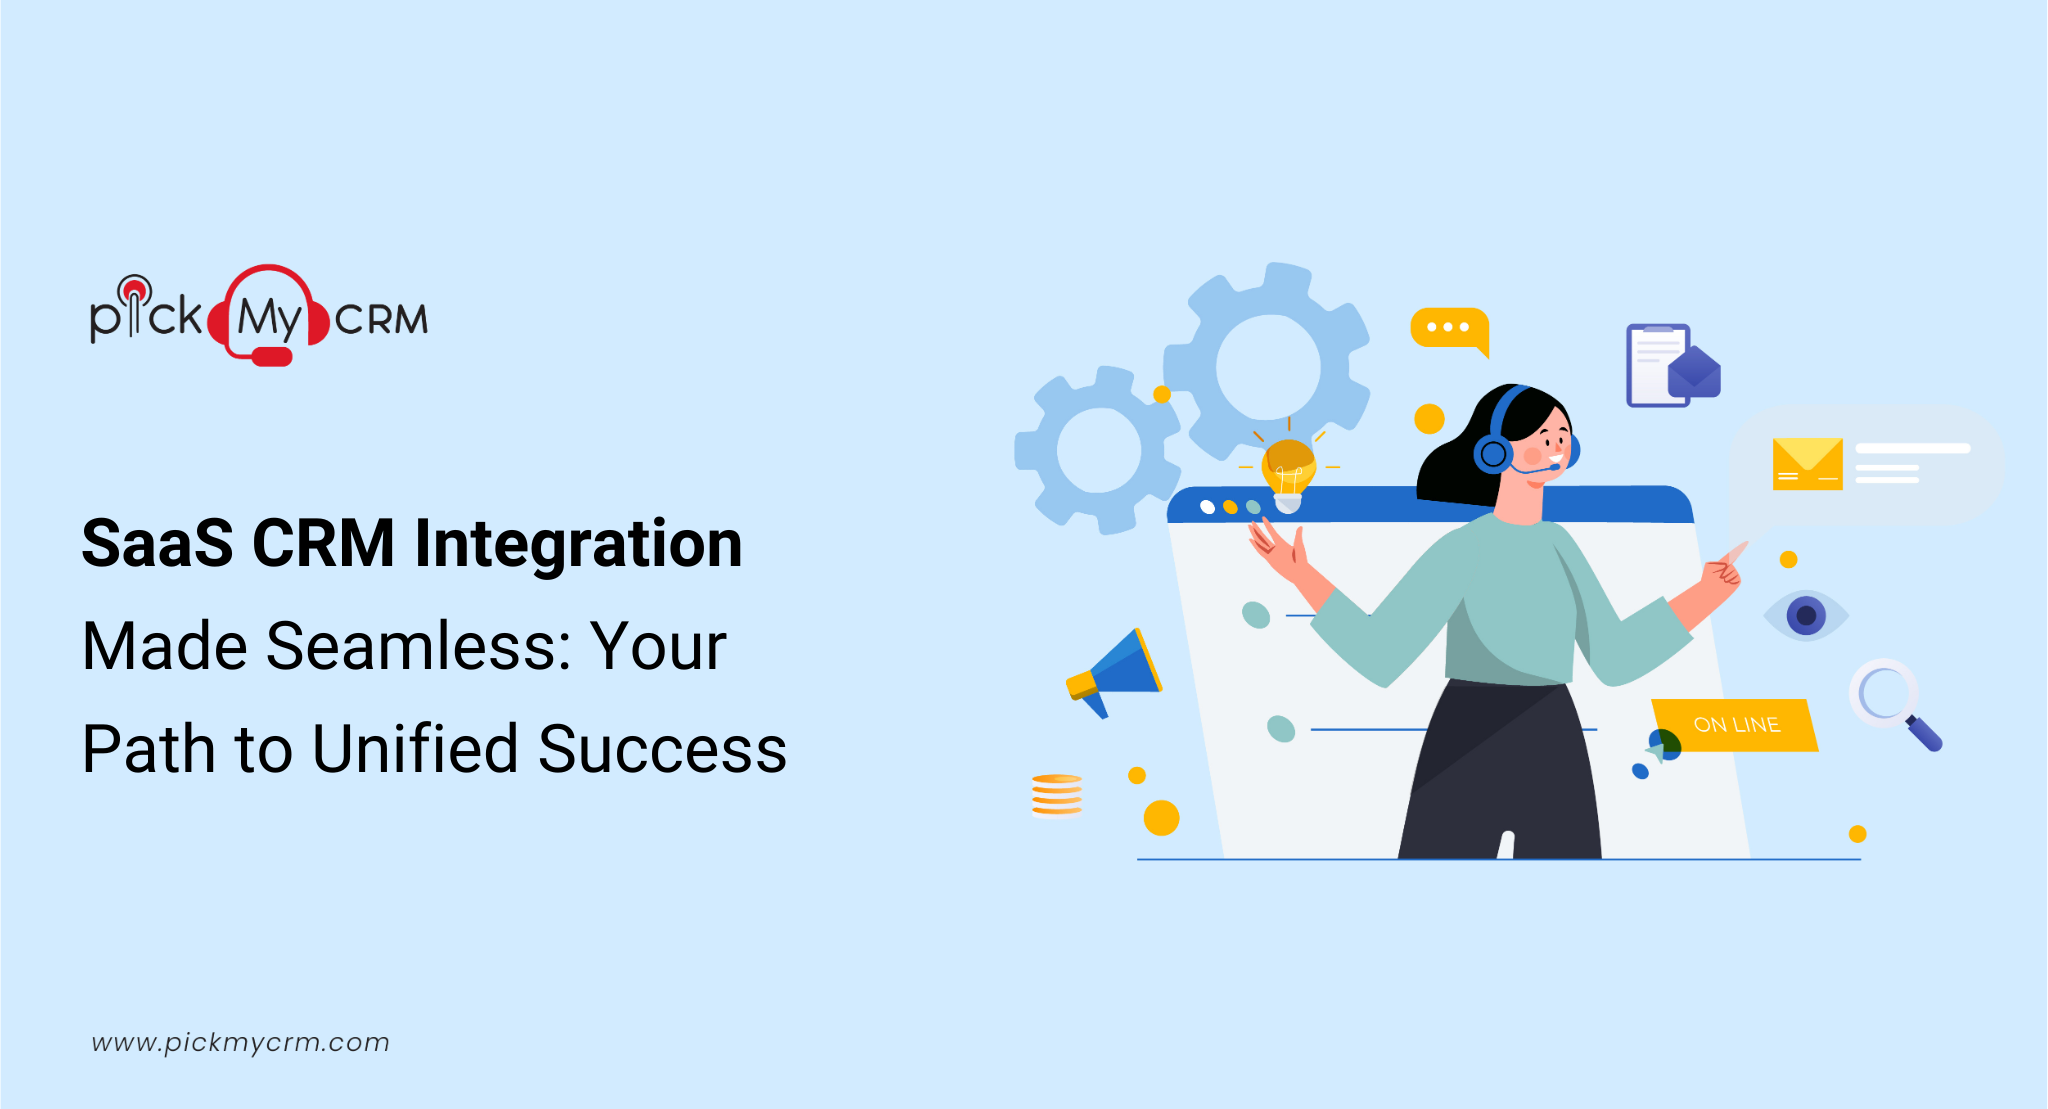 SaaS CRM Integration Made Seamless: Your Path to Unified Success